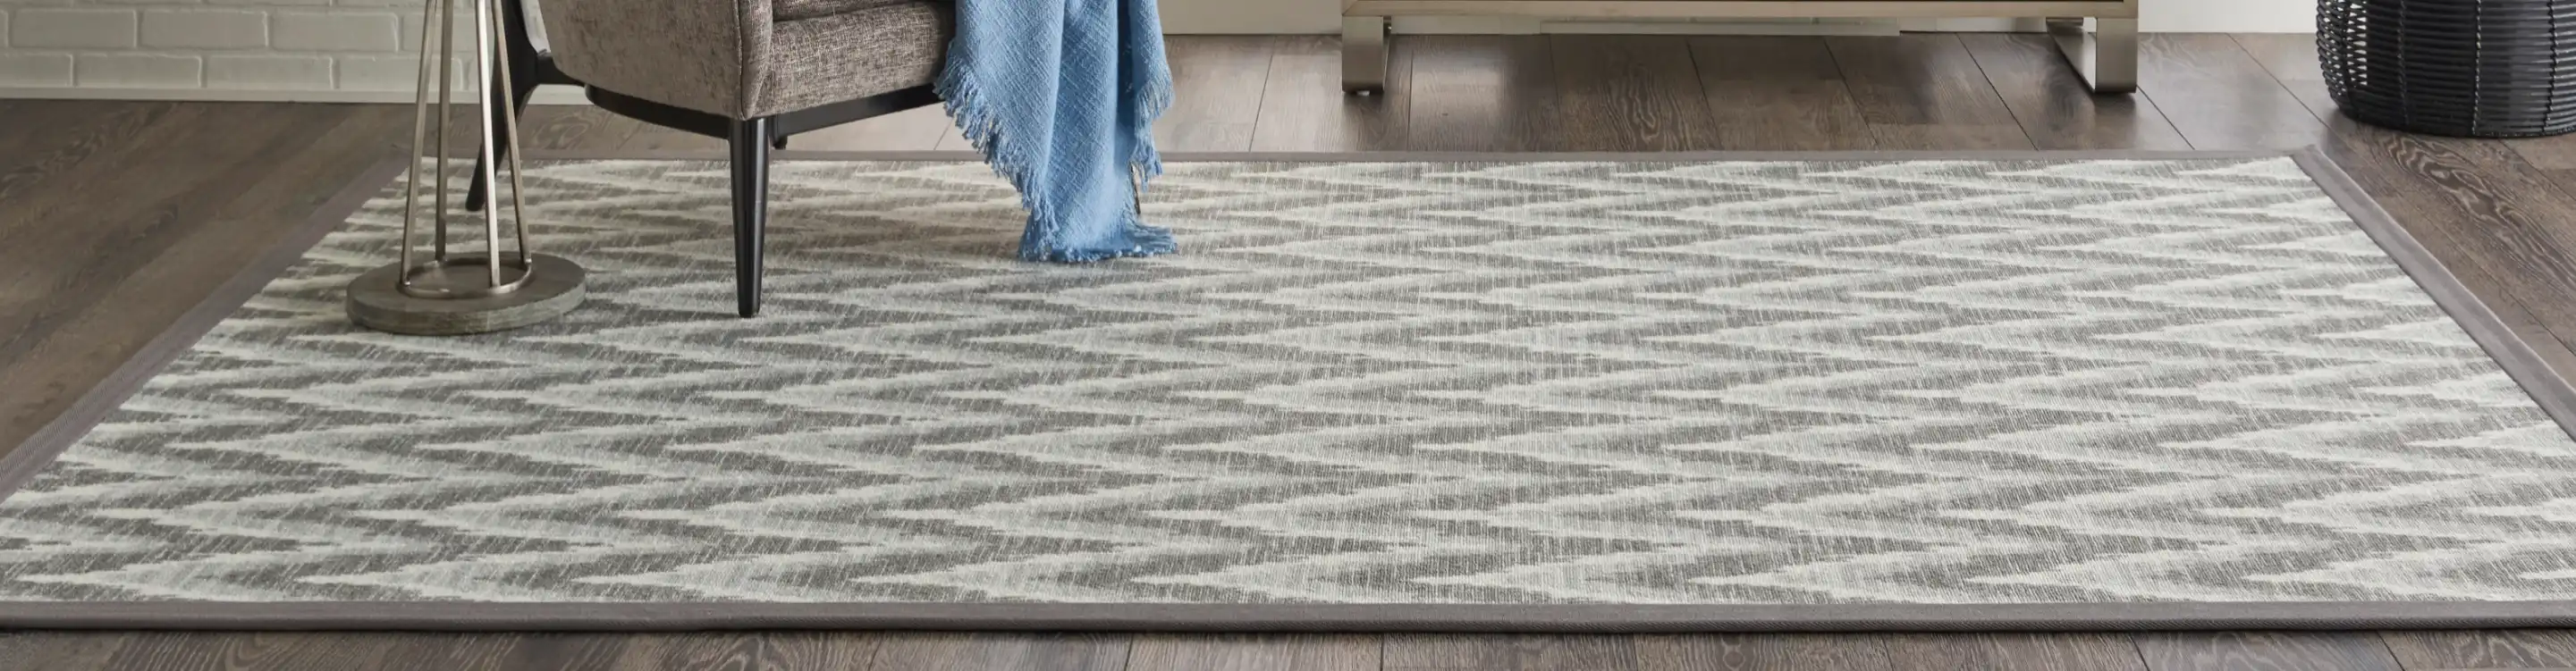 patterned area rug in living area